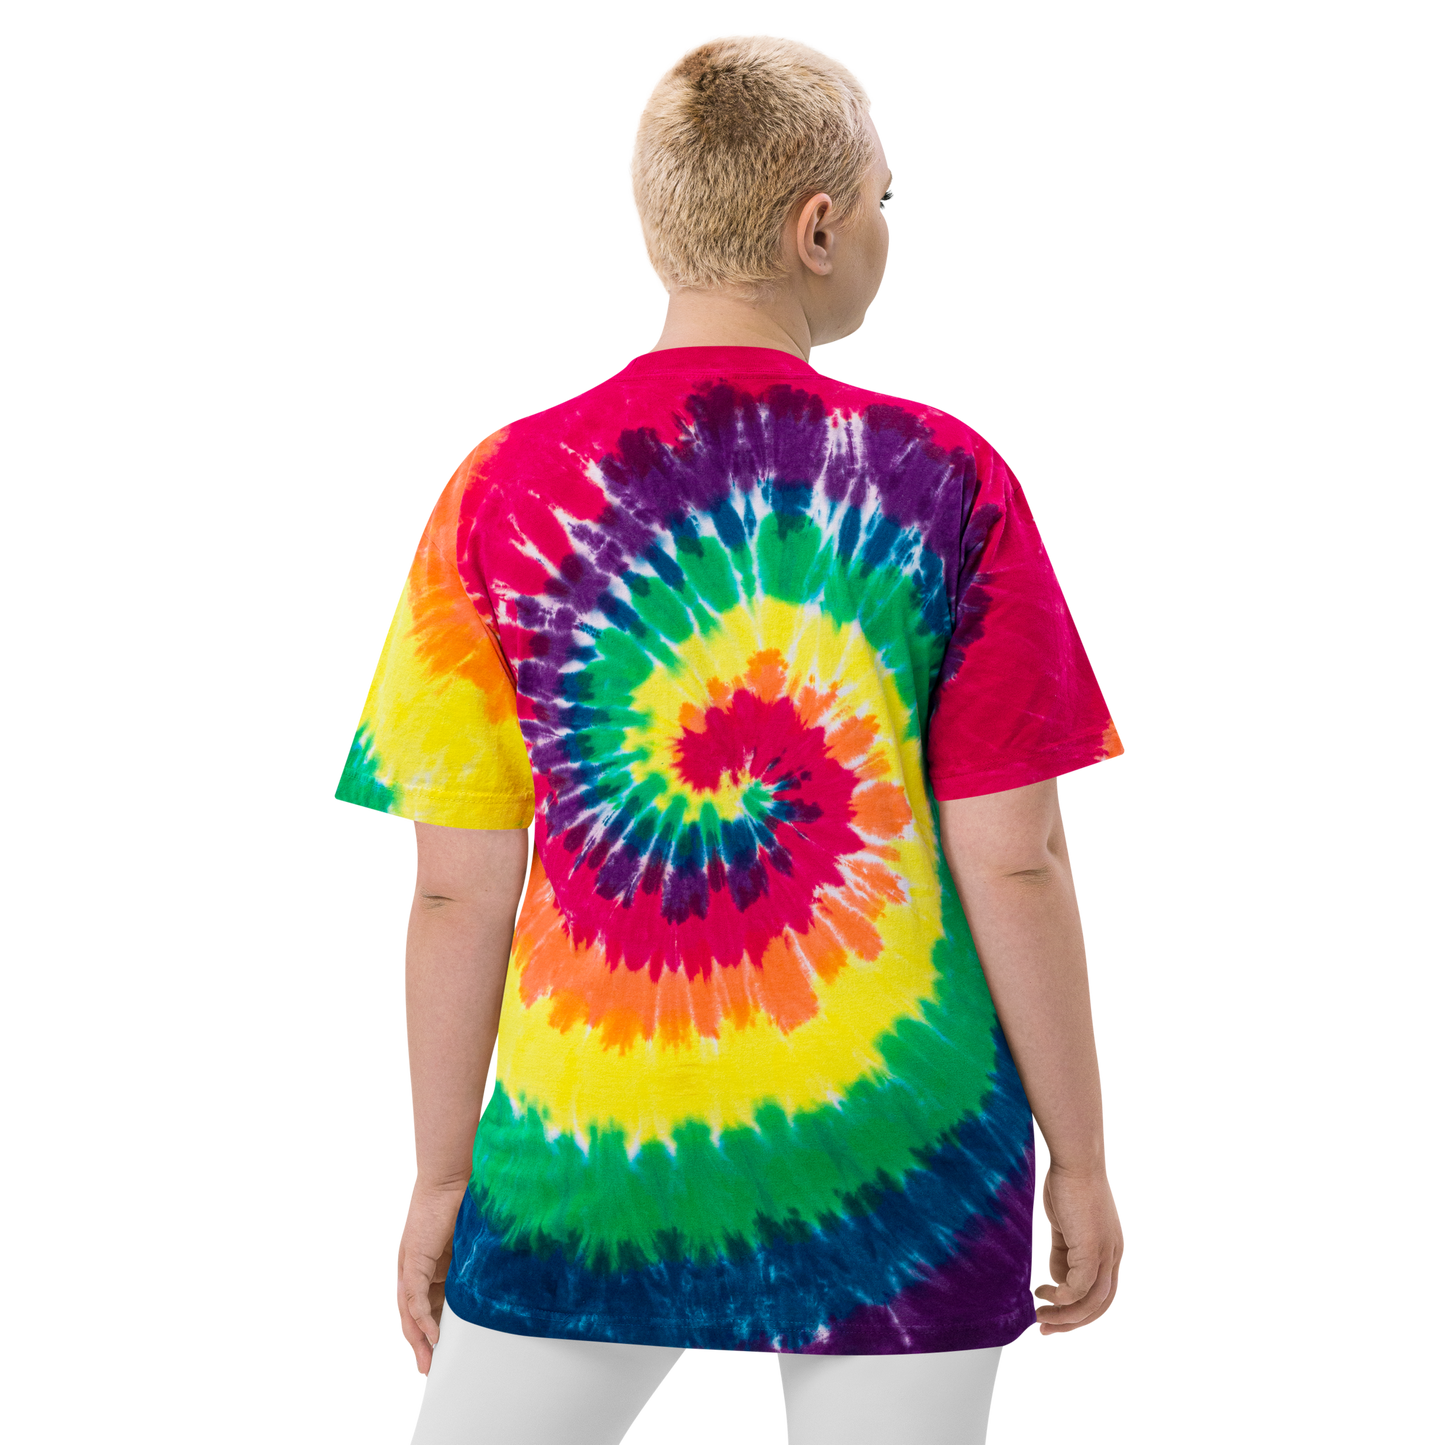 Crossed-X Oversized Tie-Dye T-Shirt • YMM Fort McMurray • YHM Designs - Image 14